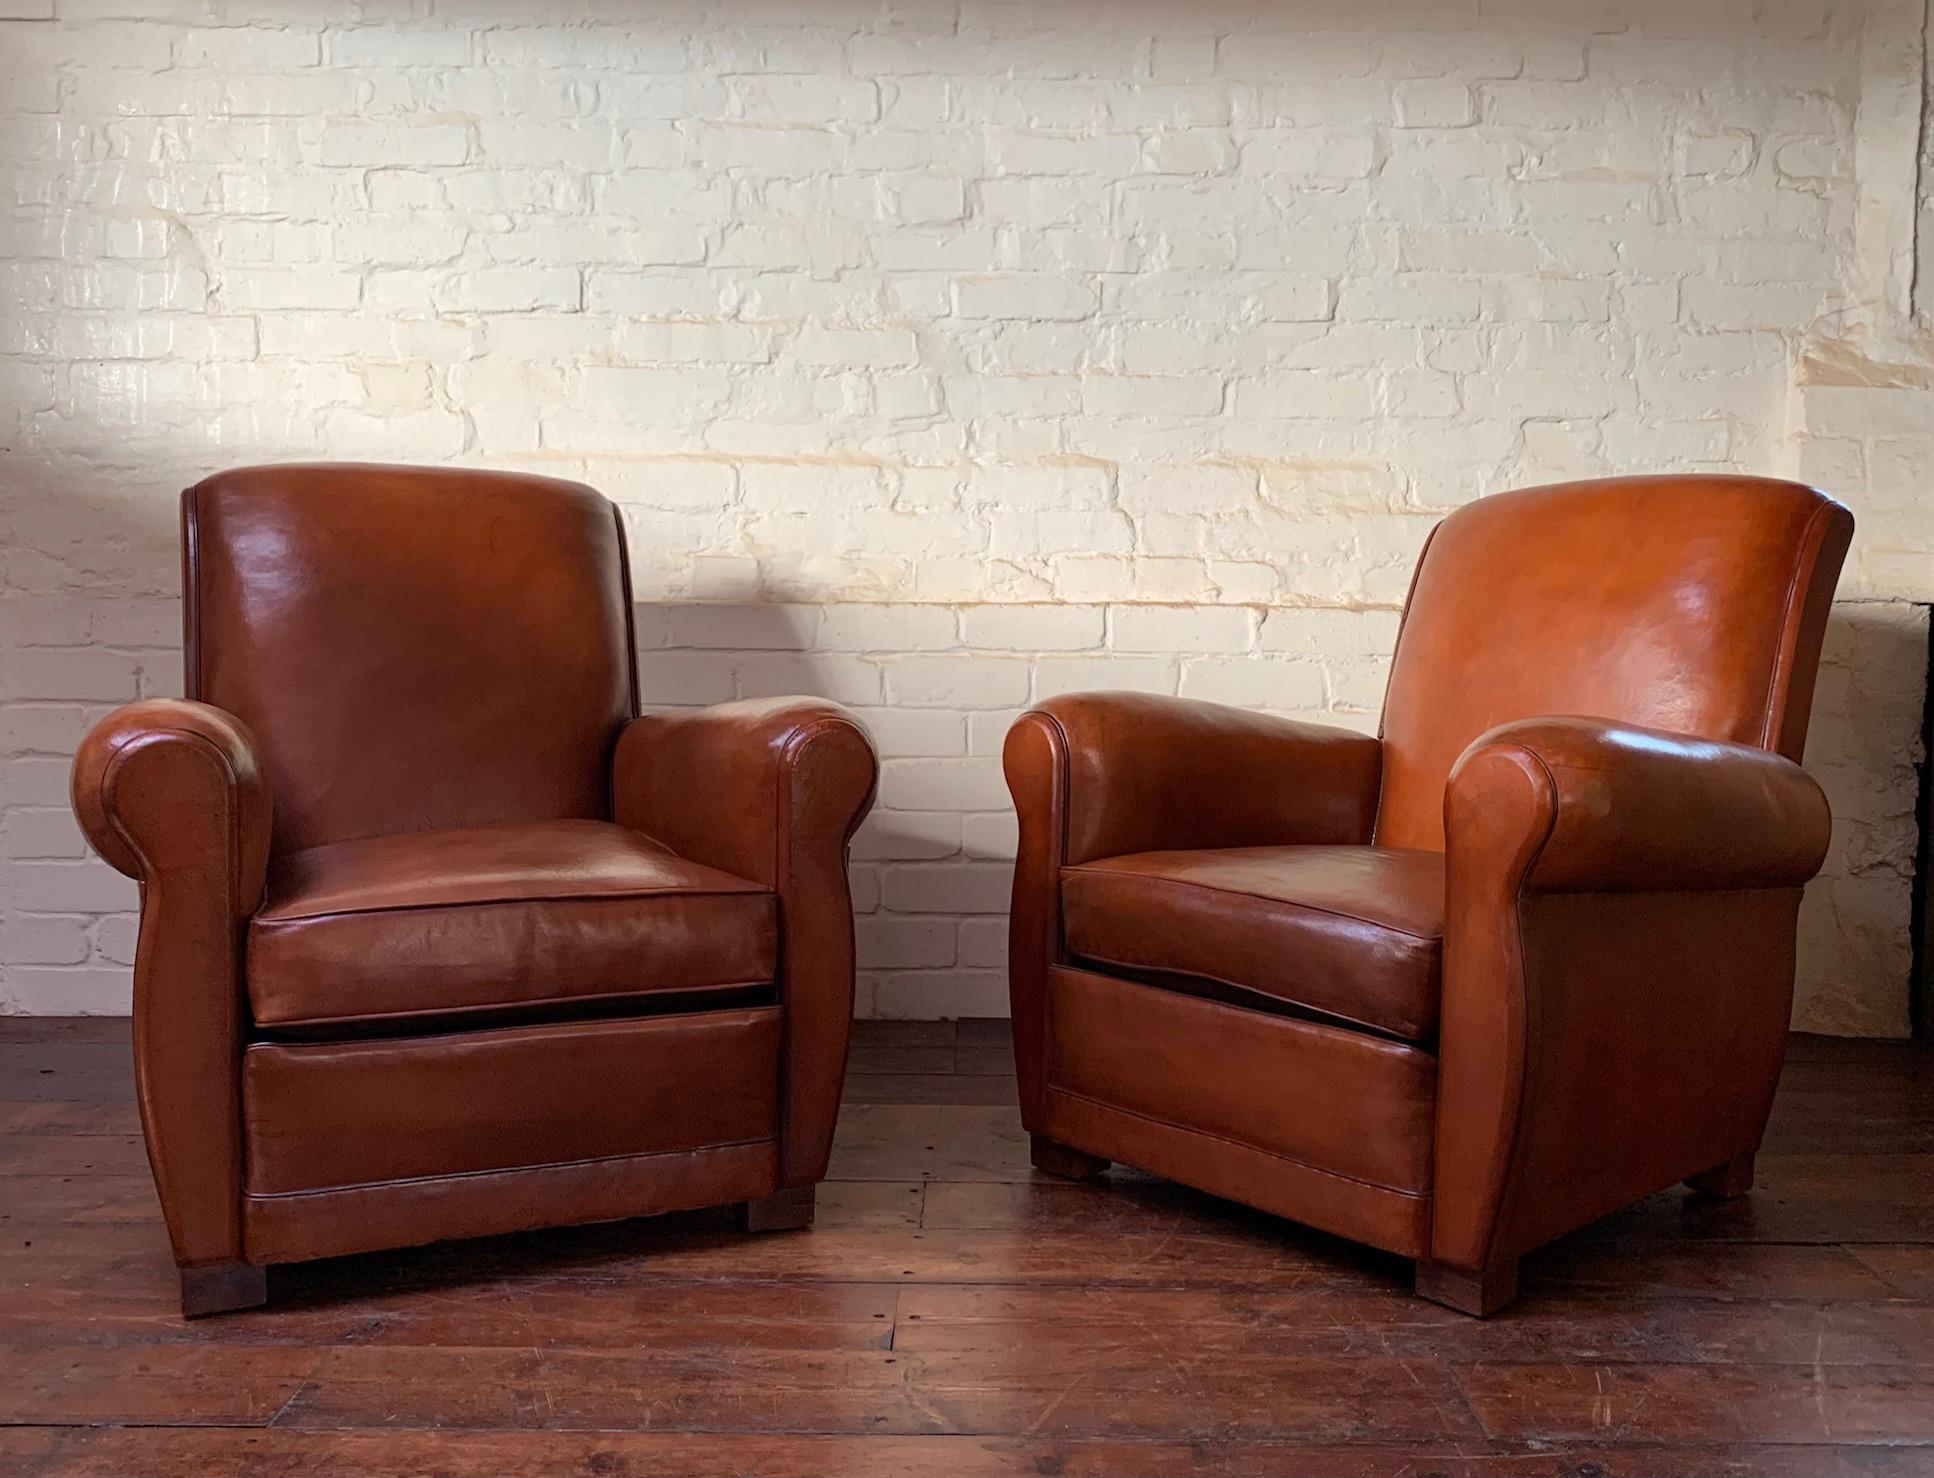 These original French leather club chairs are gorgeous. With their smooth lines and subtle styling these models have been copied and inspired  manufacturers for years, but it is of course infinitely better to have the original thing. The quality of